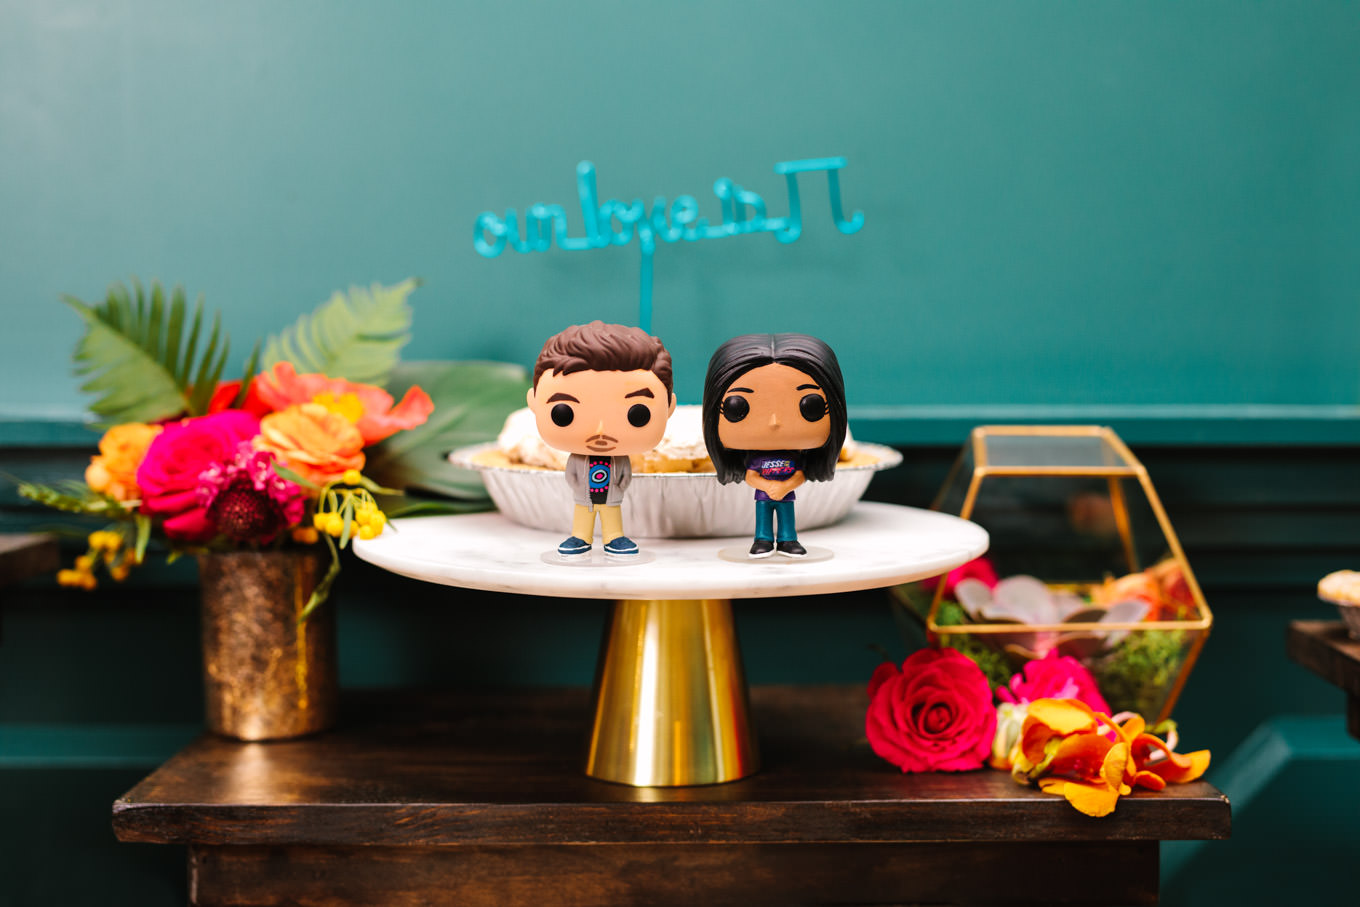 Pie at wedding reception with bride and groom bobble heads | TV inspired wedding at The Fig House Los Angeles | Published on The Knot | Fresh and colorful photography for fun-loving couples in Southern California | #losangeleswedding #TVwedding #colorfulwedding #theknot   Source: Mary Costa Photography | Los Angeles wedding photographer